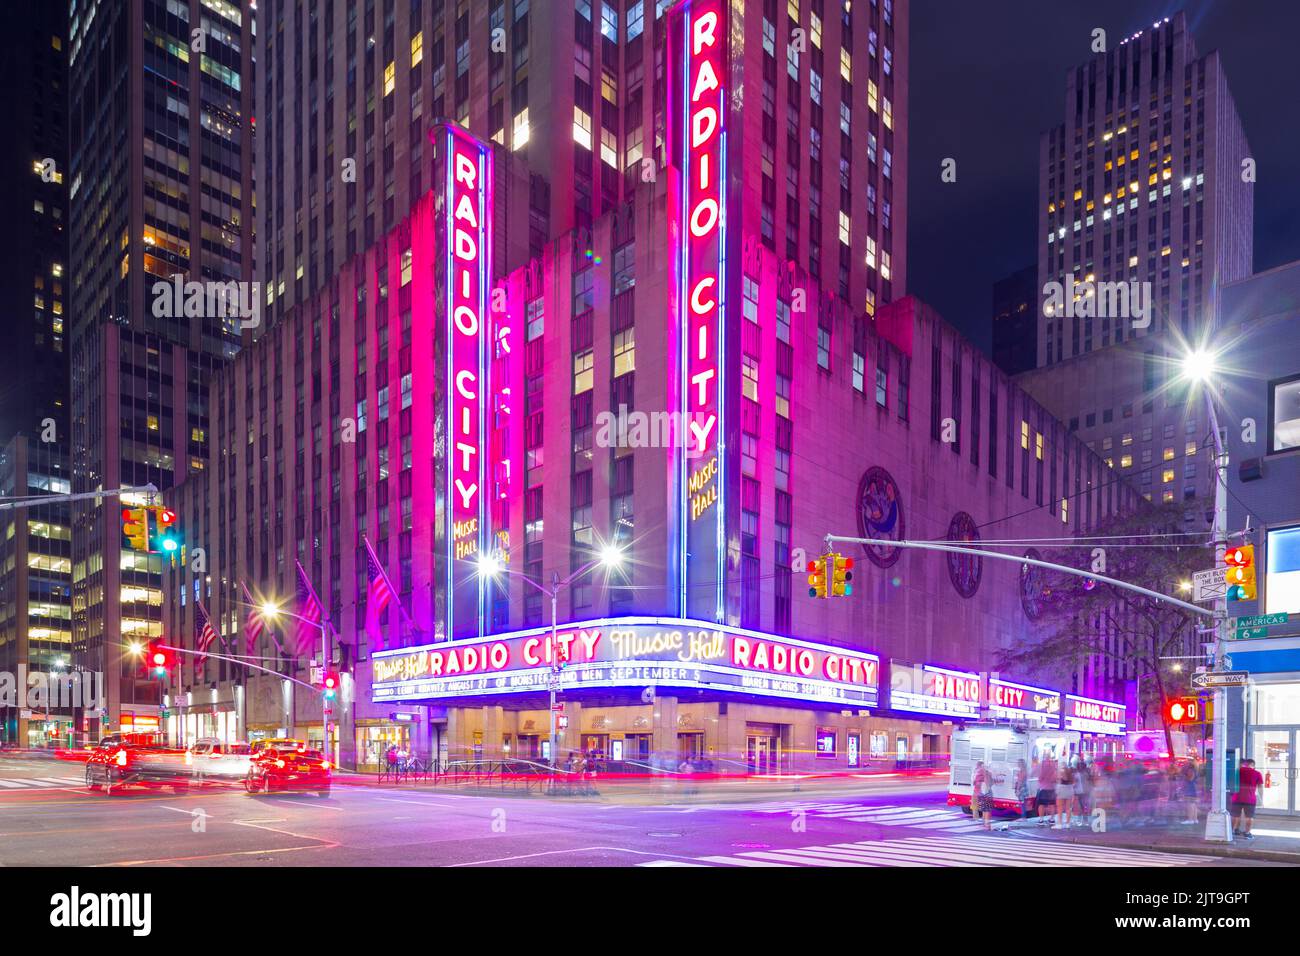 A night view of the Radio City Music Hall entertainment venue at 1260 Avenue of the Americas within the Rockefeller Center in Manhattan, New York, USA Stock Photo